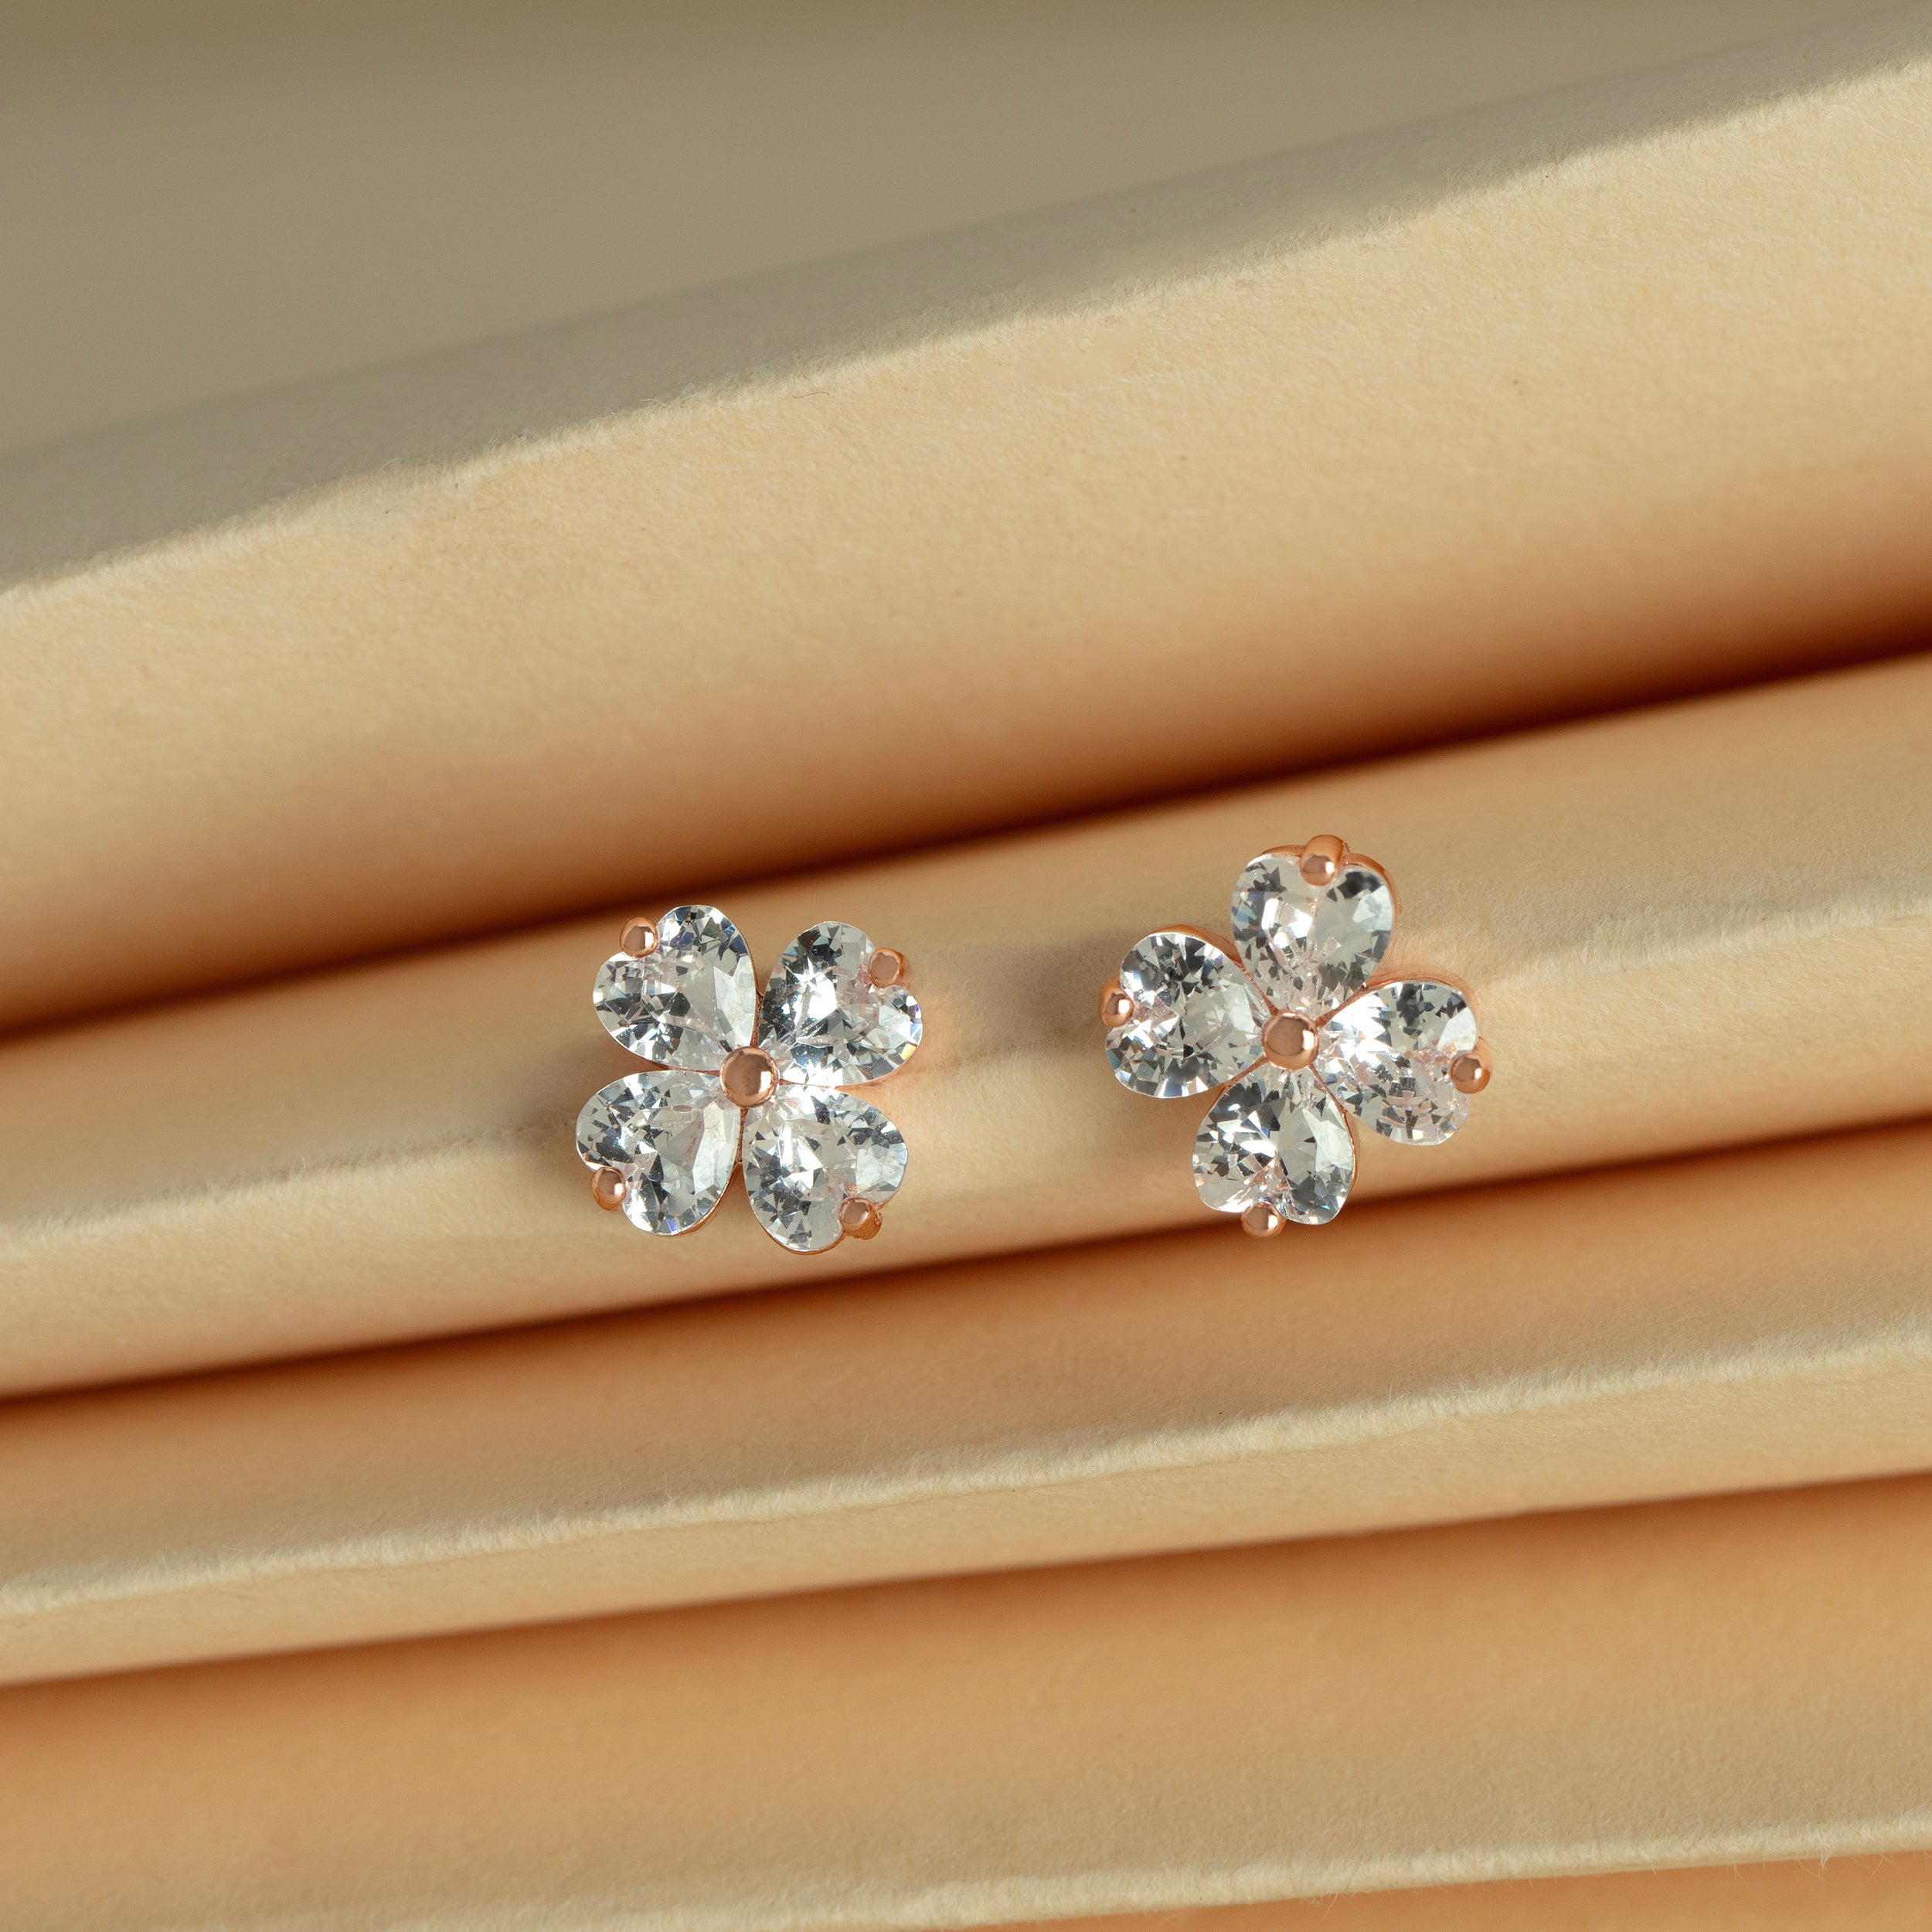 Blossoming Radiance: Sterling Silver Studs | SKU: 0019272610, 0019272450, 0019272795, 0019272757